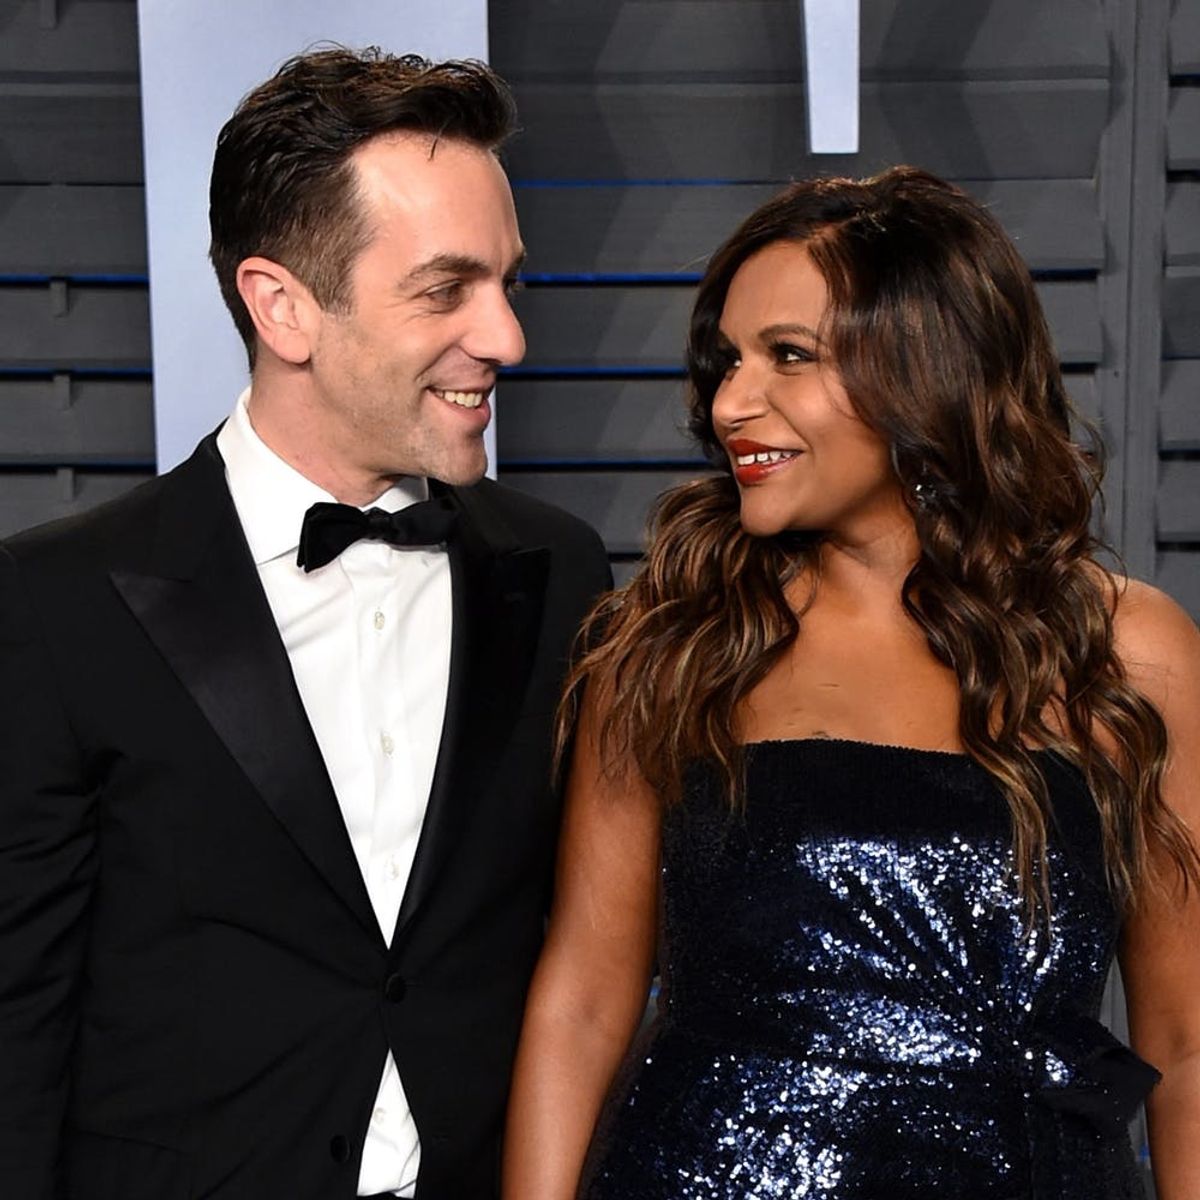 BJ Novak’s Note About Mindy Kaling in ‘A Wrinkle in Time’ Will Hit You Right in the Feels